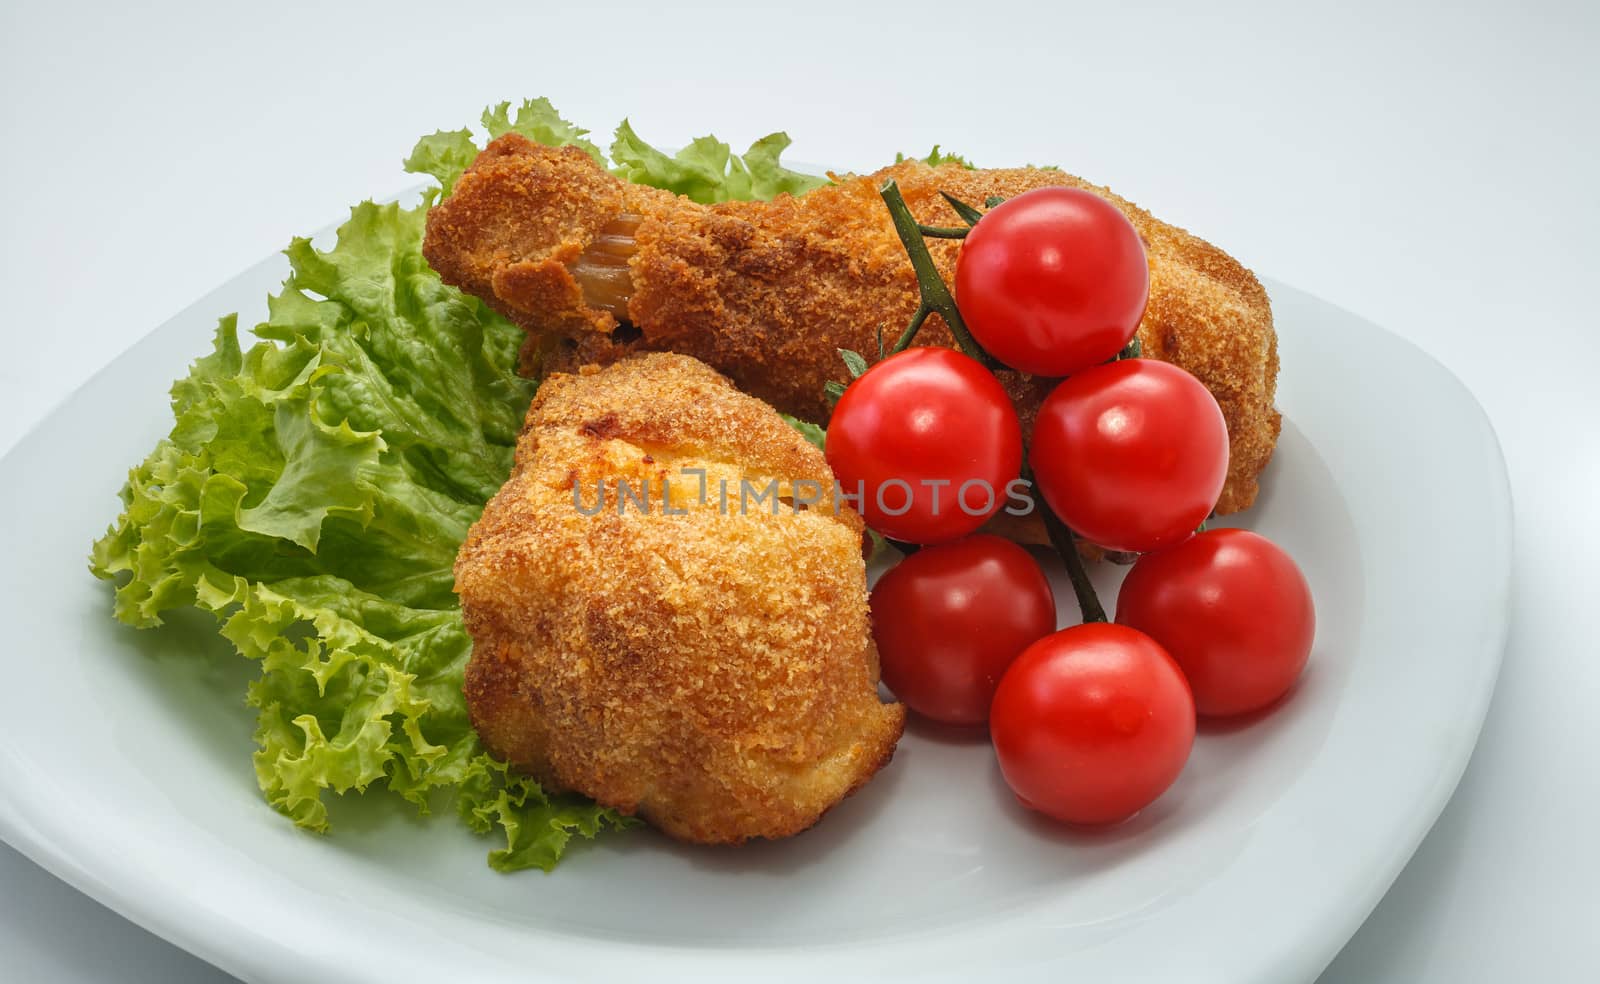 Fried chicken pieces on a plate with lettuce and tomatoes. Taken on a sheet of white plastic. Is not an isolate.